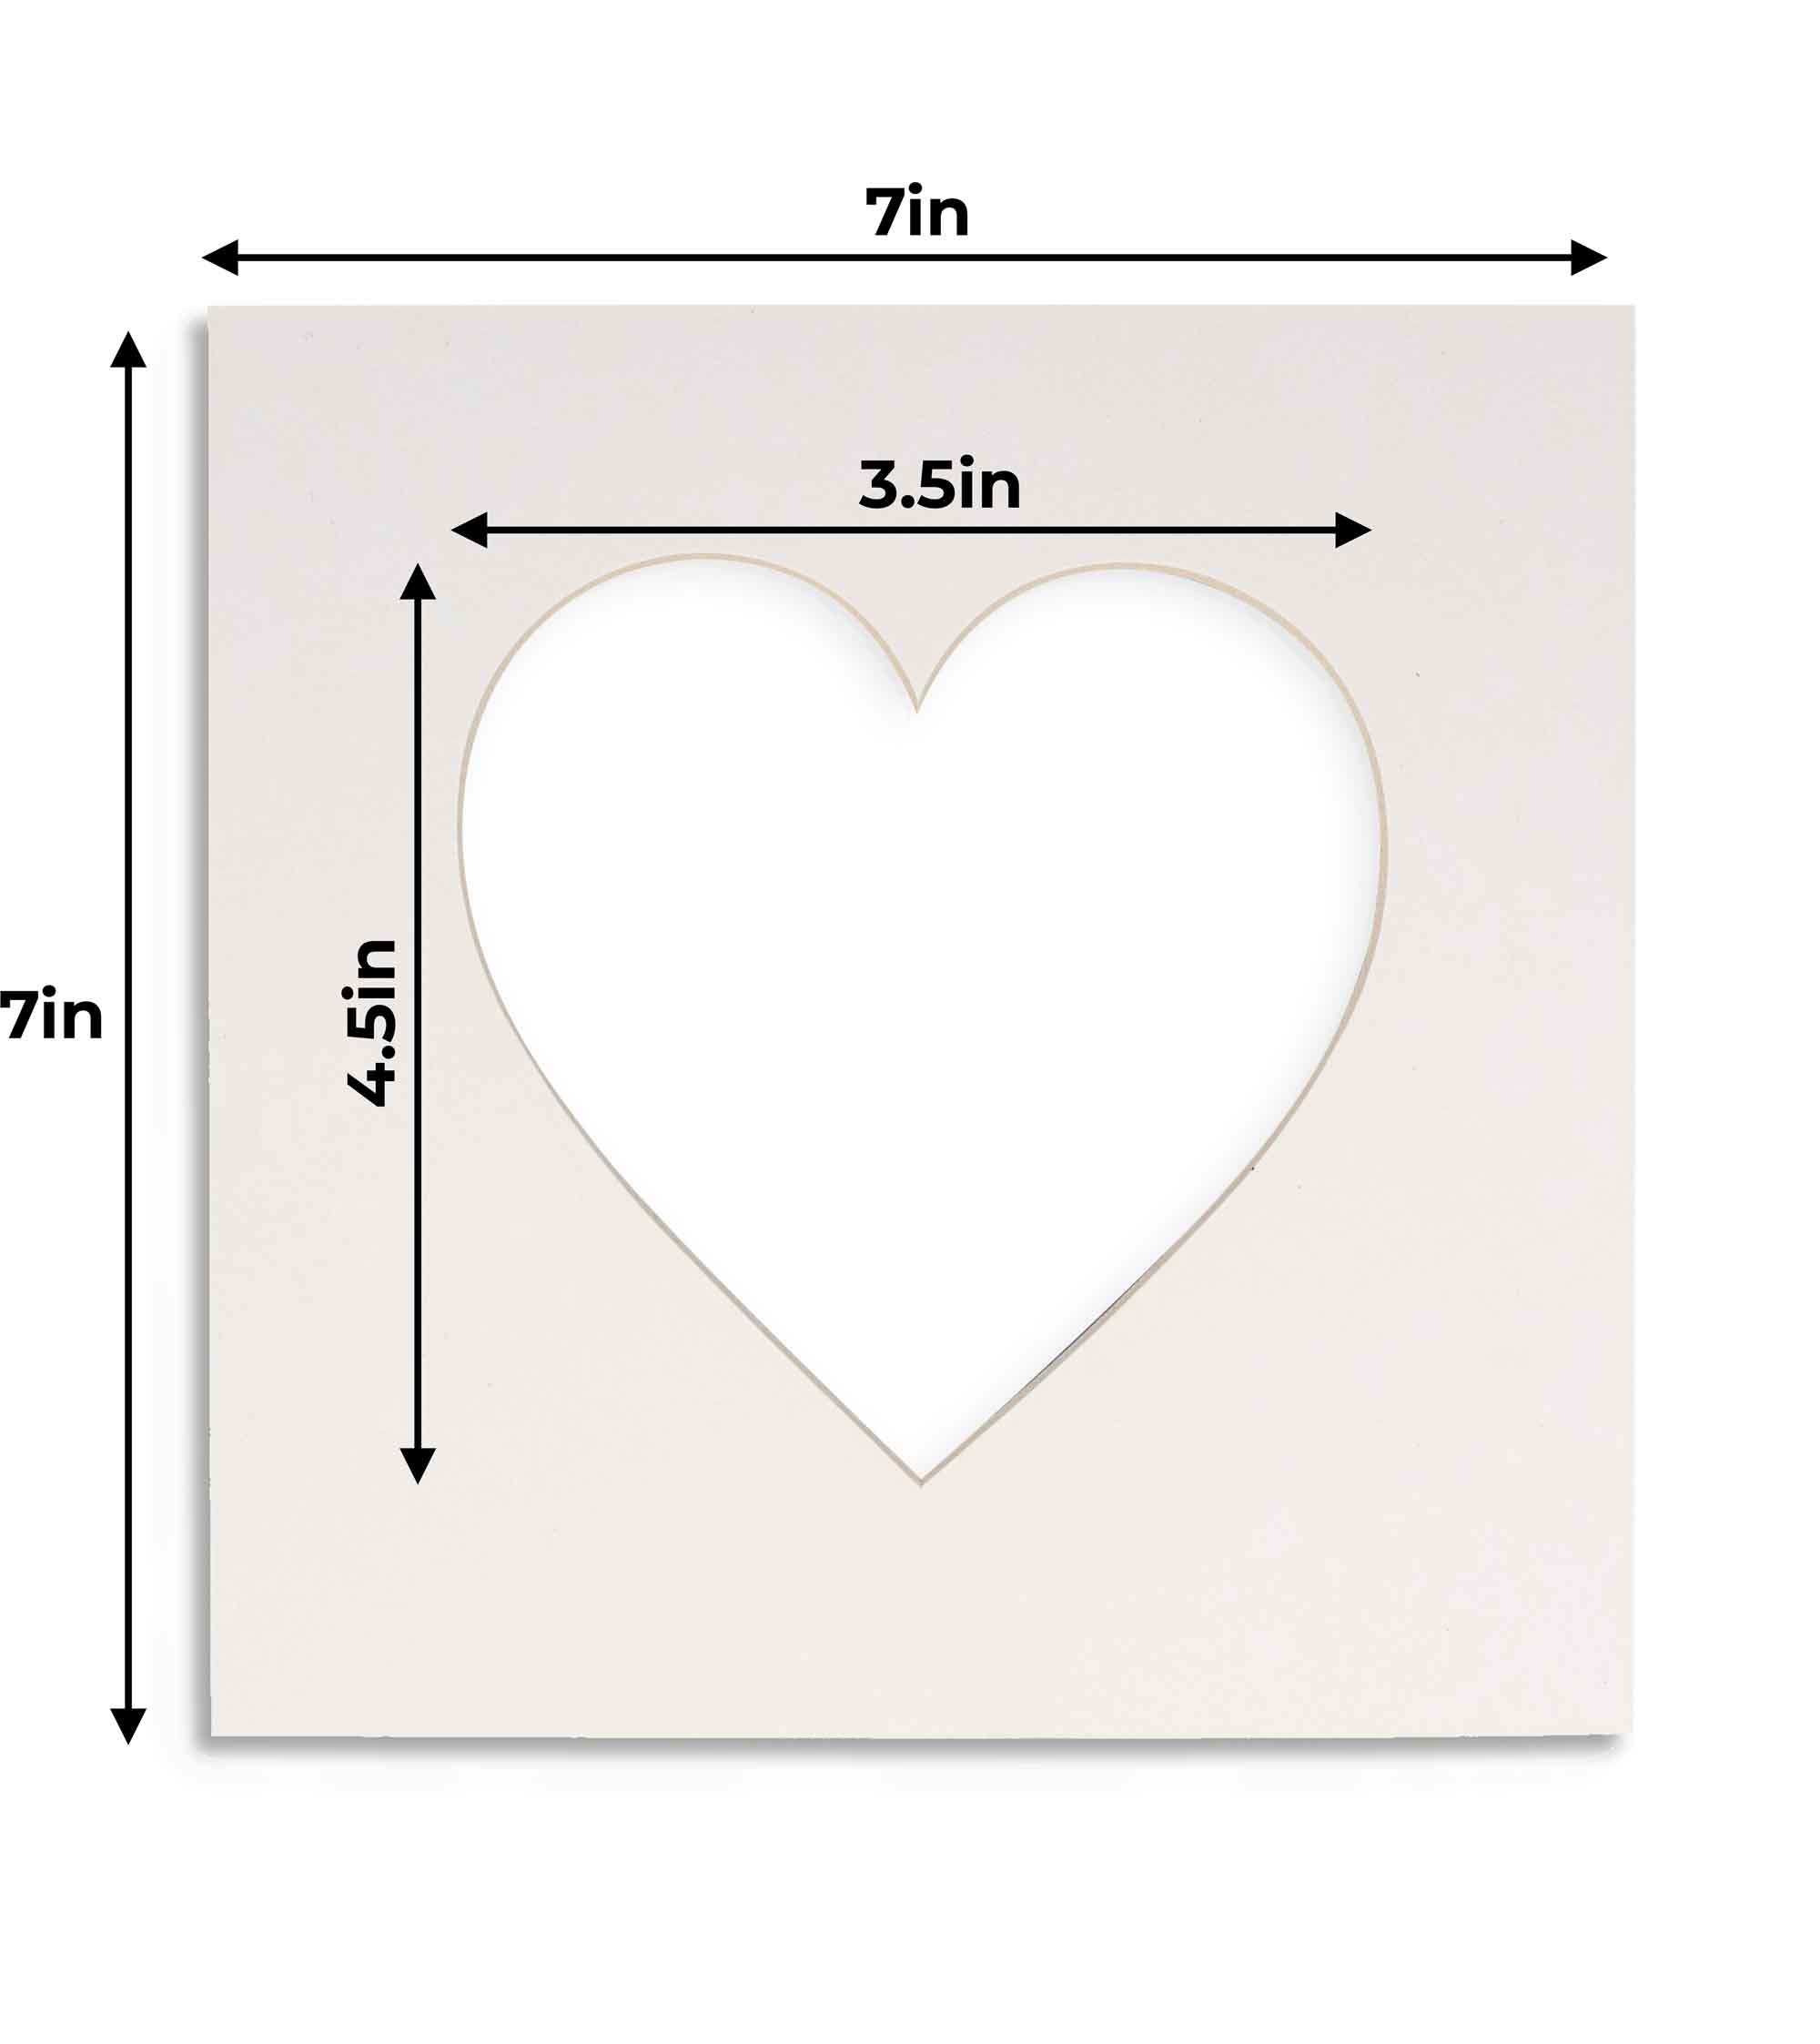 CustomPictureFrames.com Royal Blue Acid Free 7x7 Heart Picture Frame Mat with White Core Bevel Cut for 4x5 Pictures - Fits 7x7 Frame